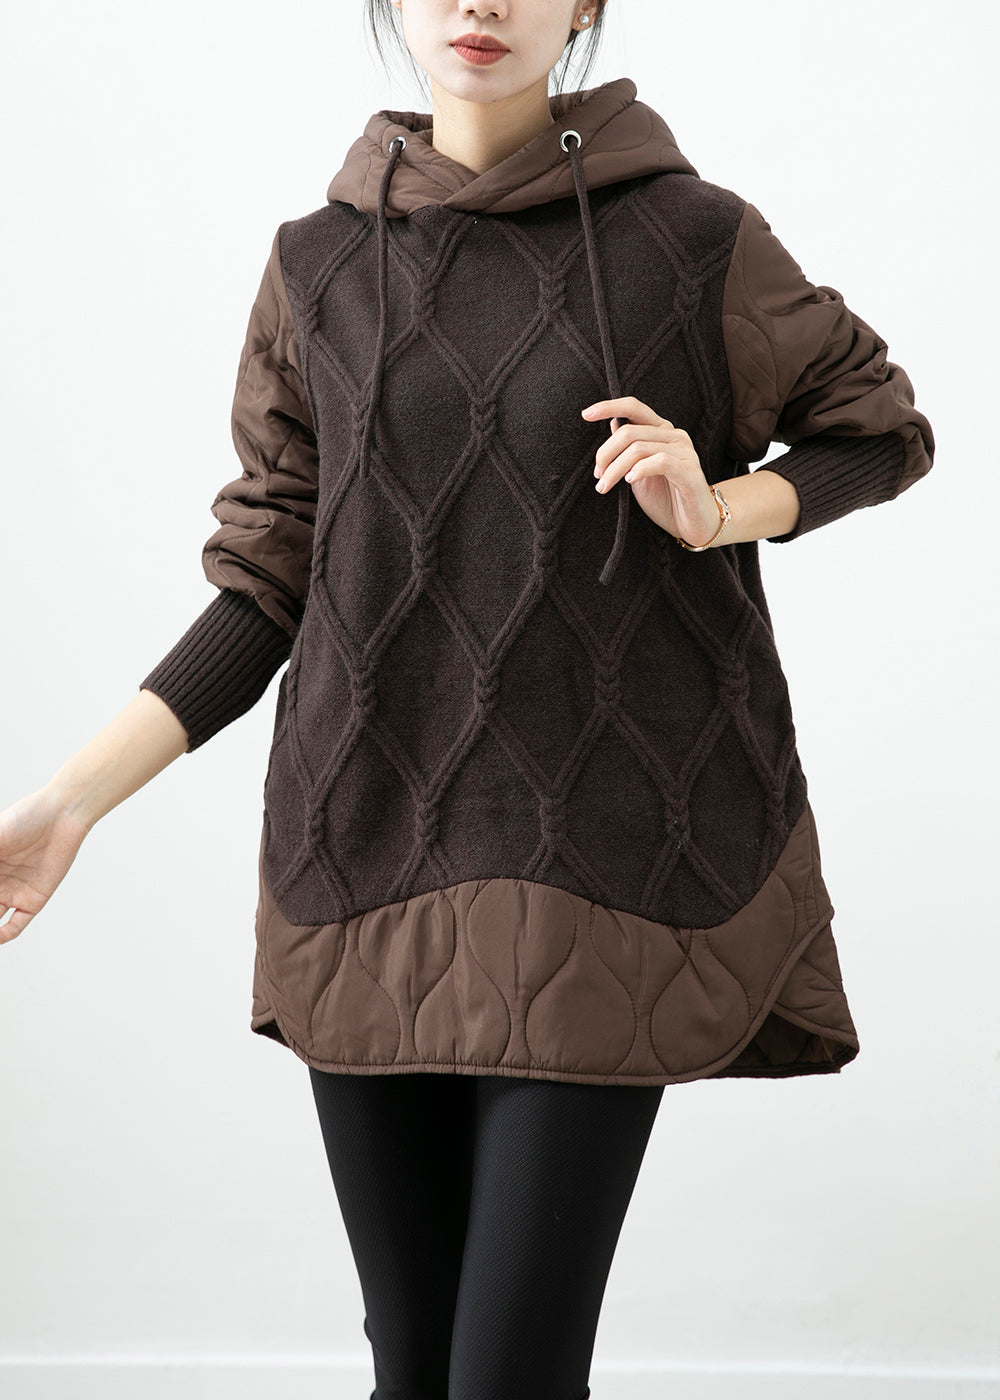 Chocolate Patchwork Knit Fine Cotton Filled Pullover Streetwear Dress Hooded Winter